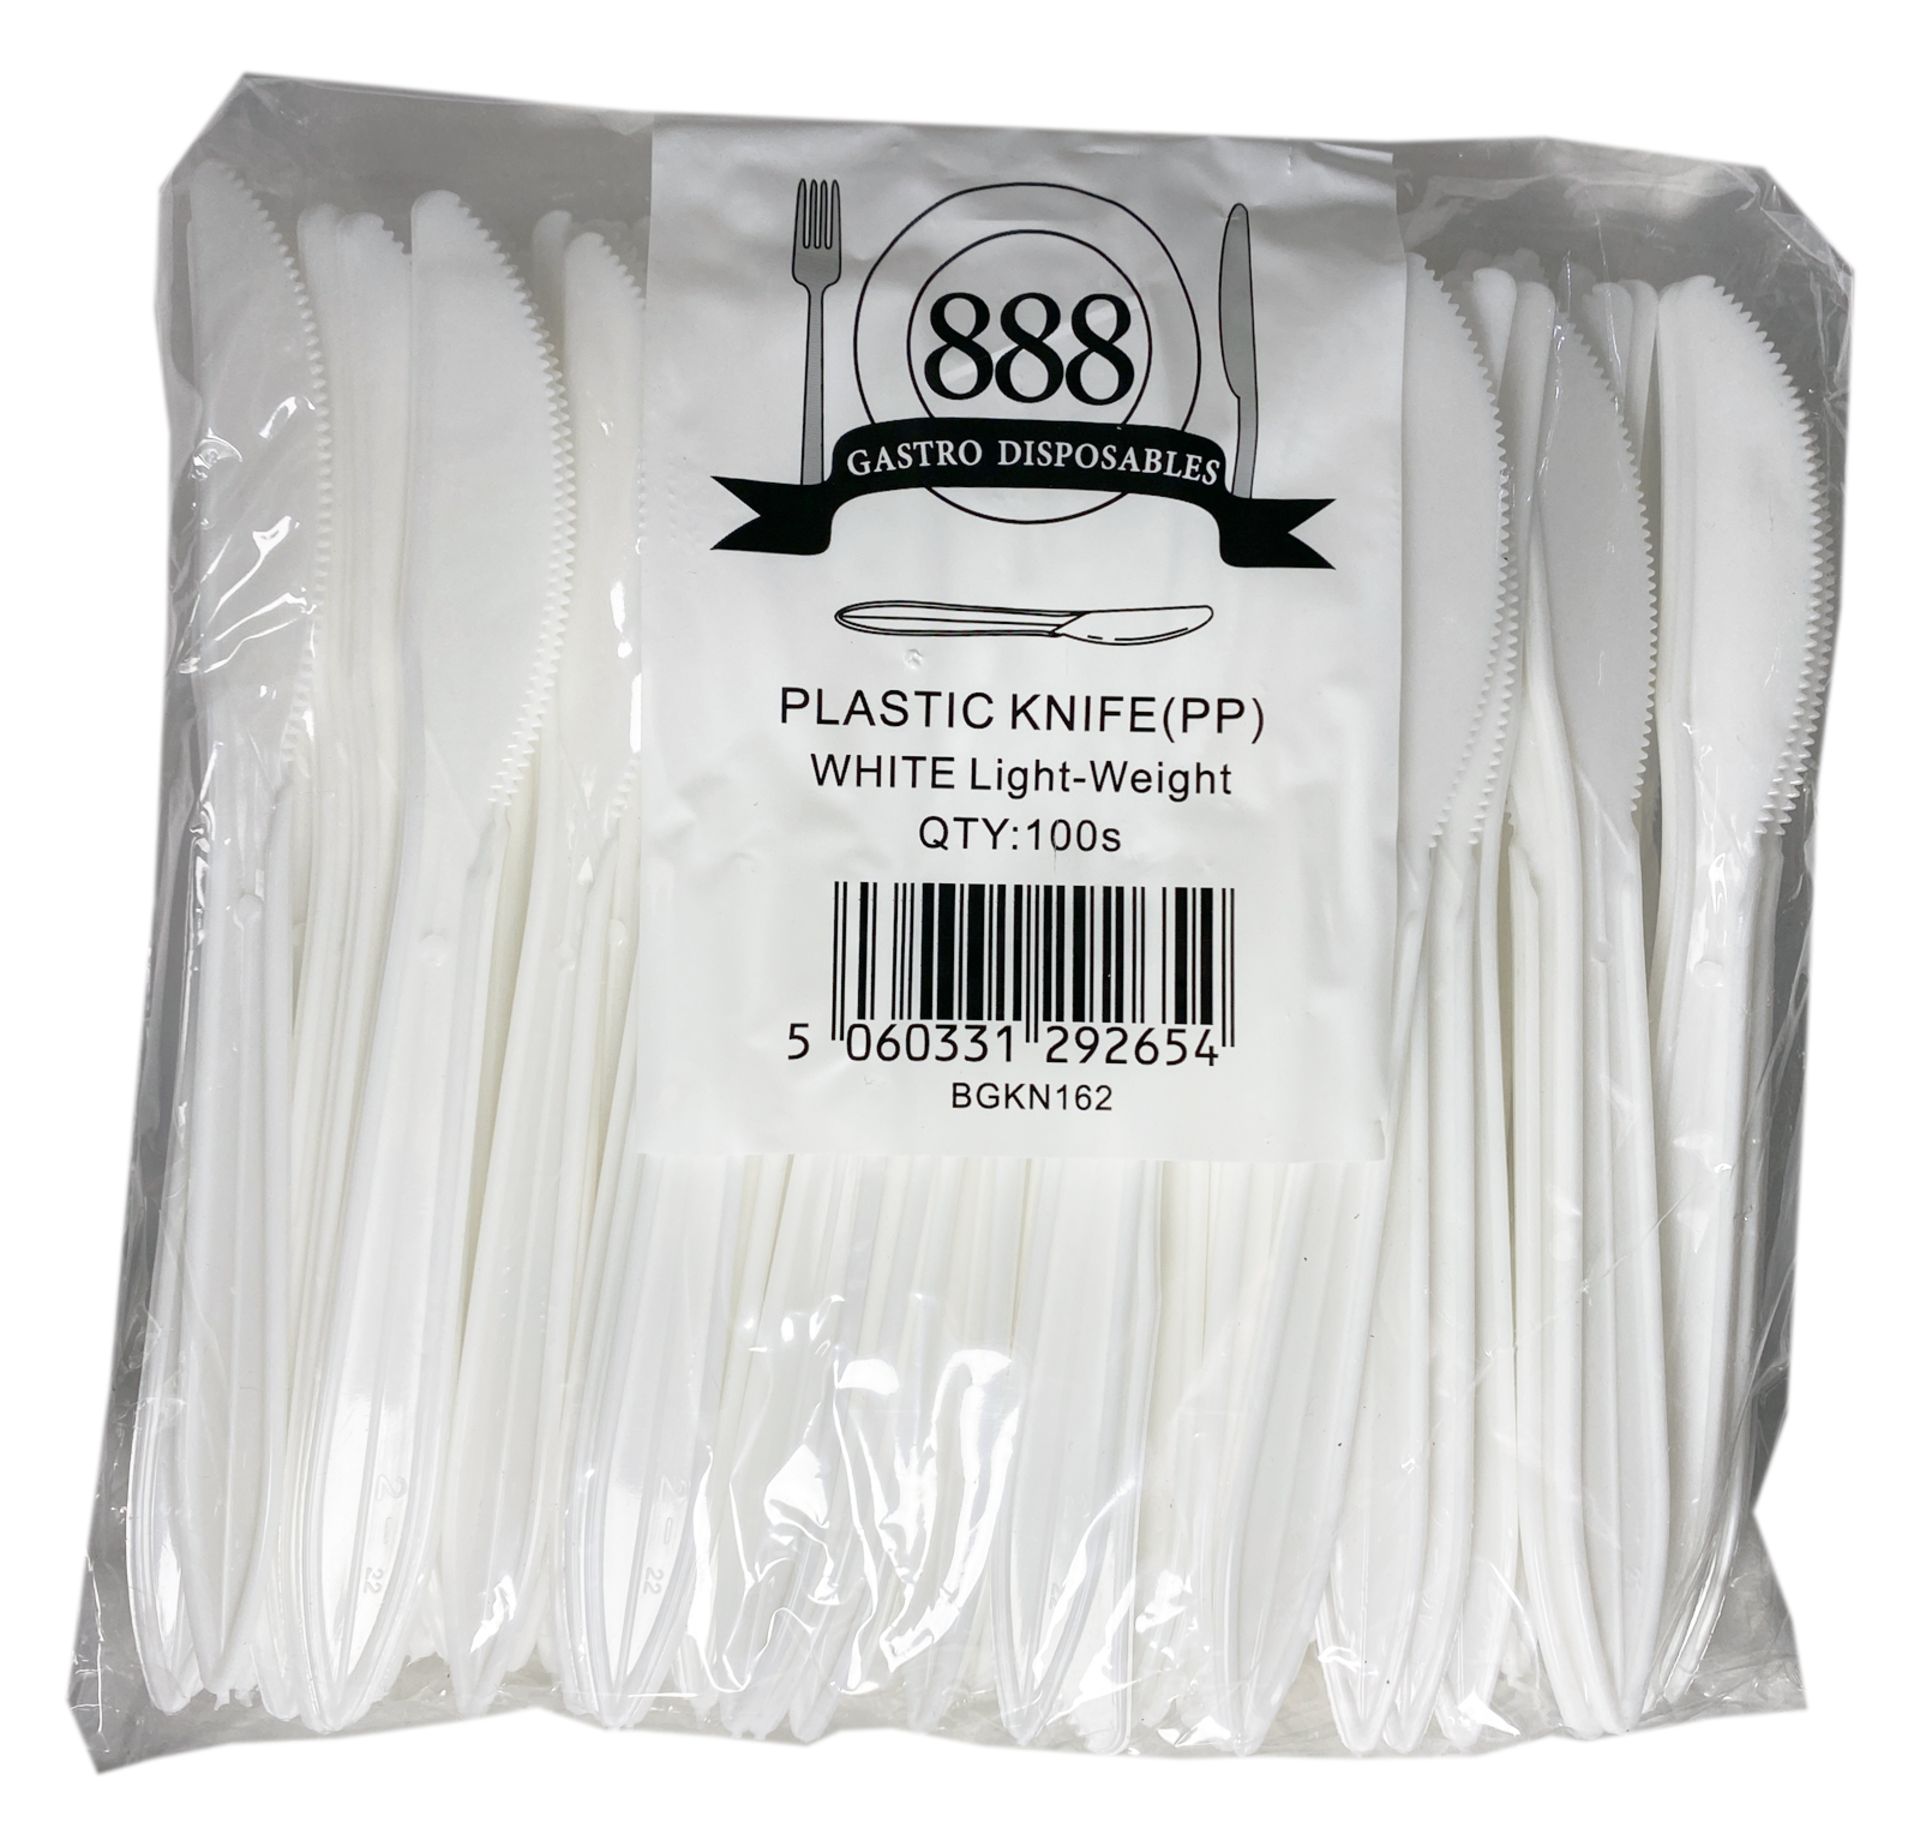 2 x Boxes of 1000 Plastic Knives by 888 Gastro Disposables | DSP1